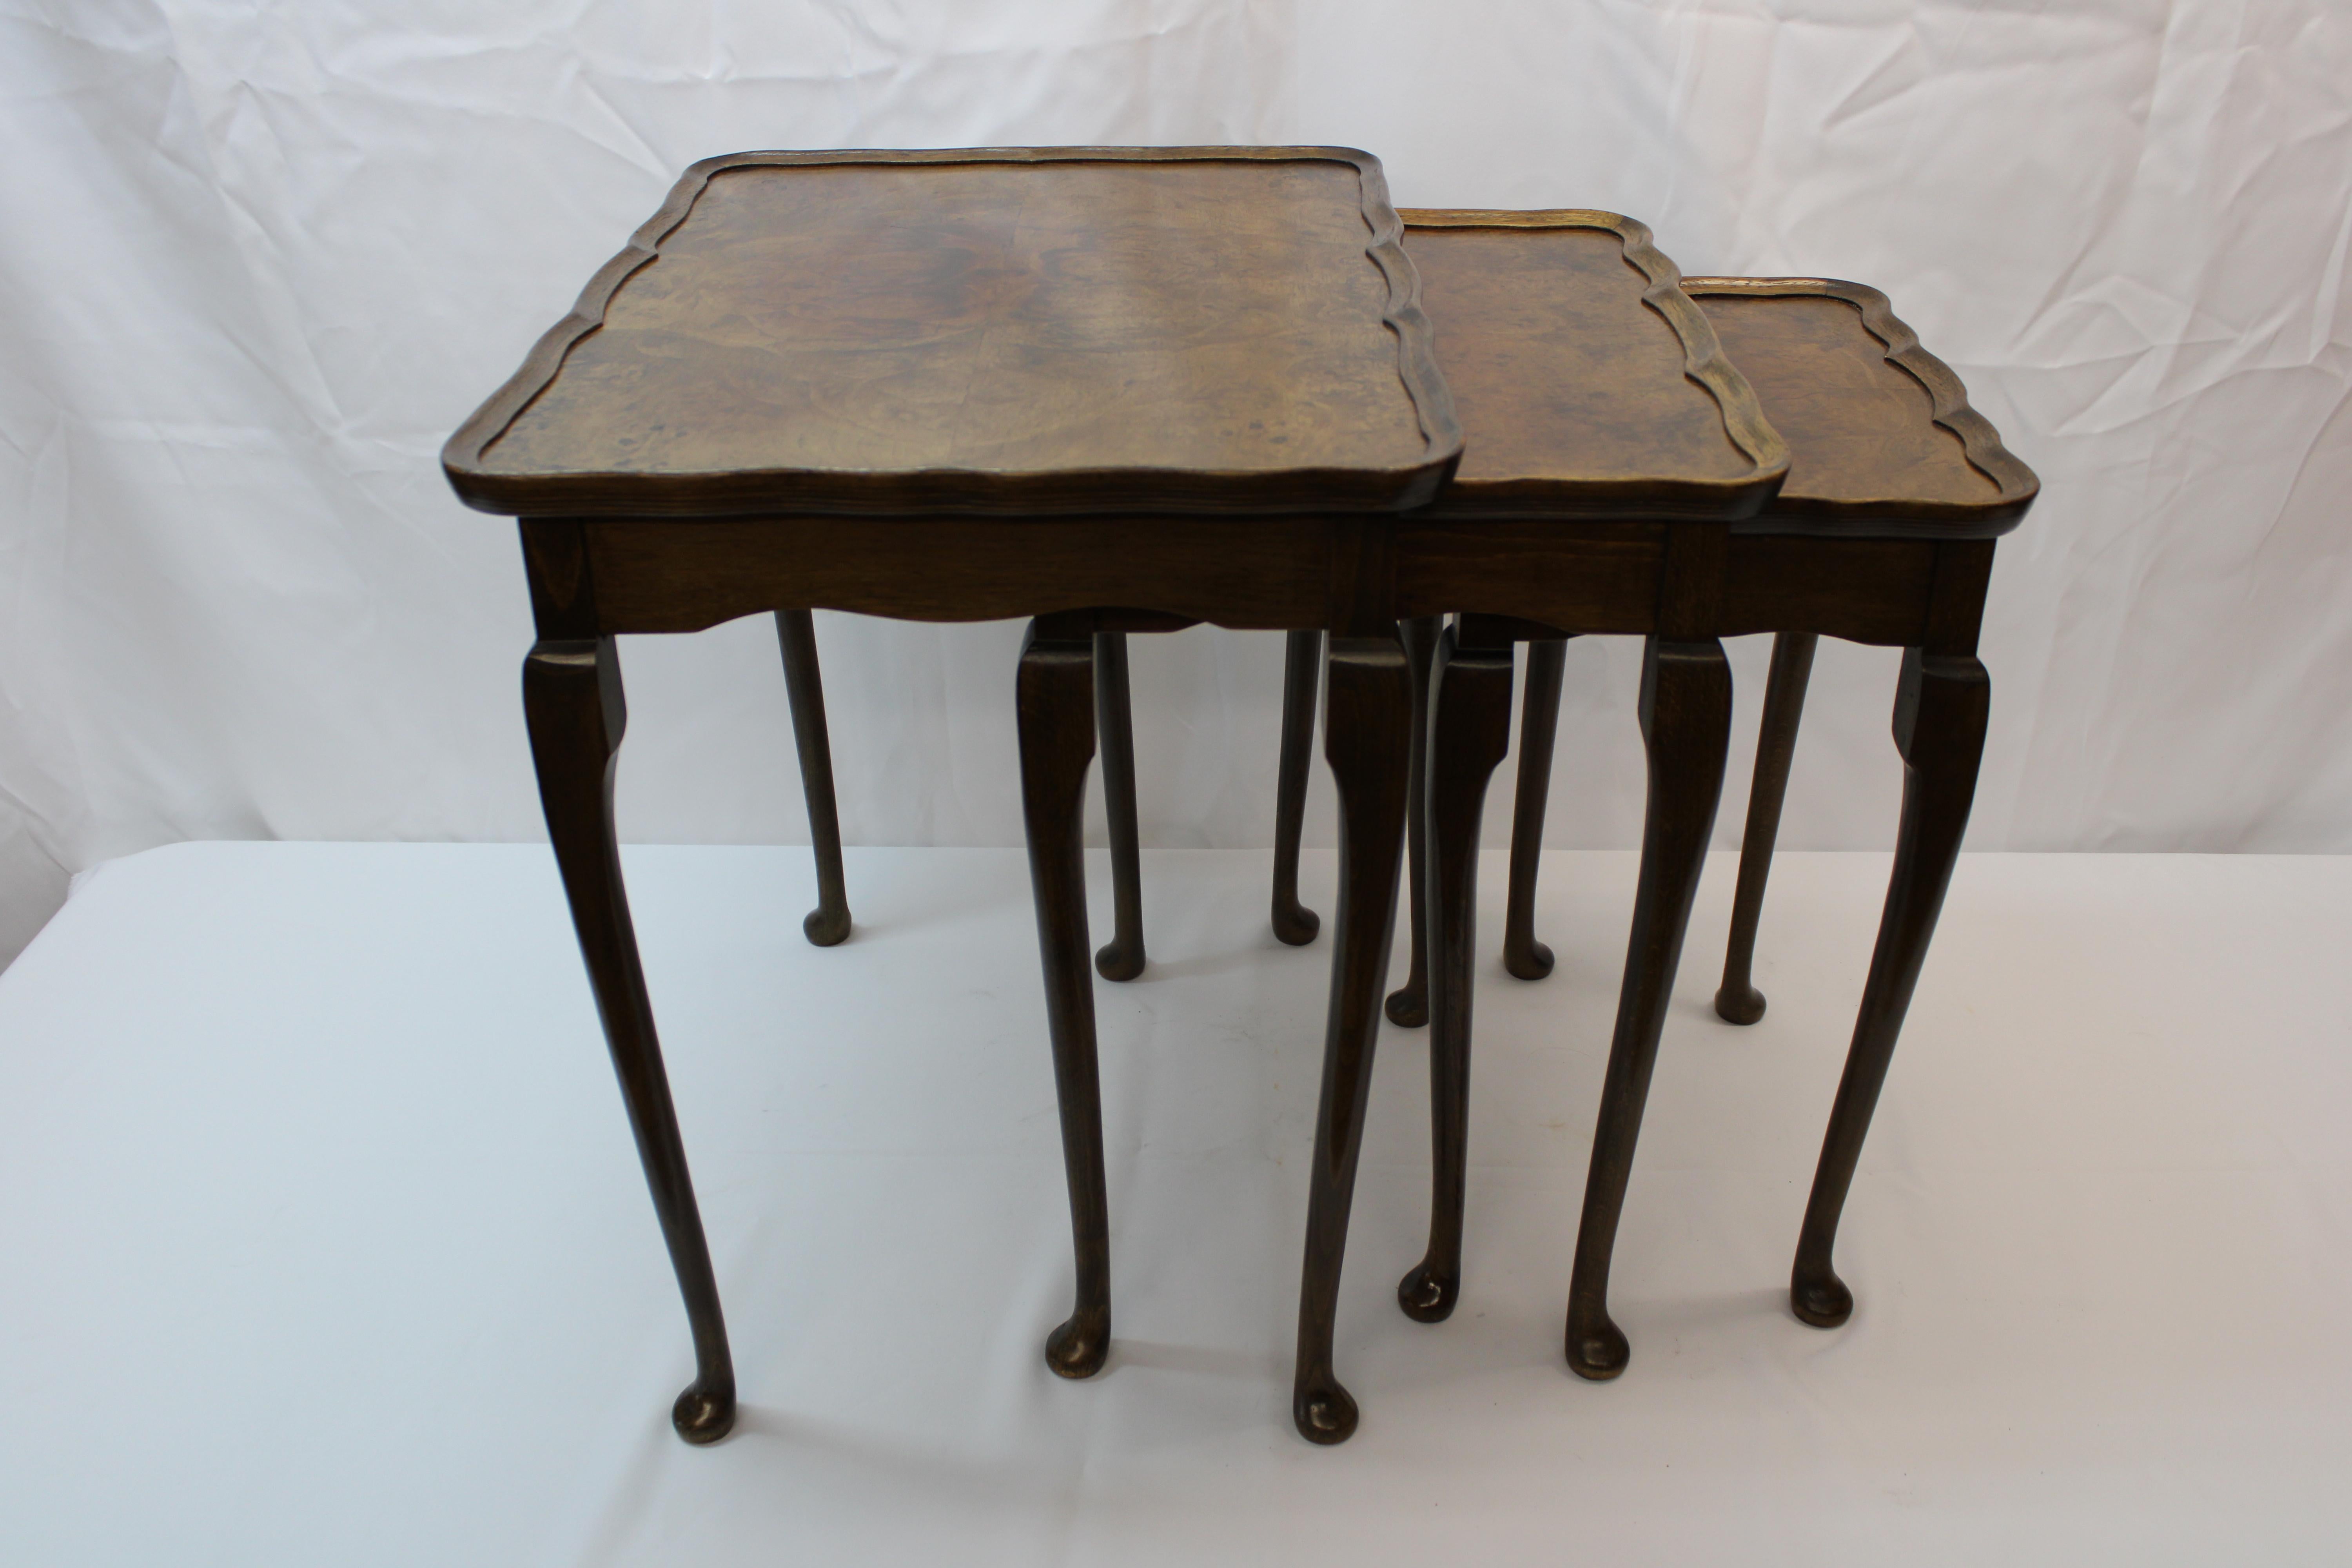 Queen Anne styled burled wood nesting tables made in England.